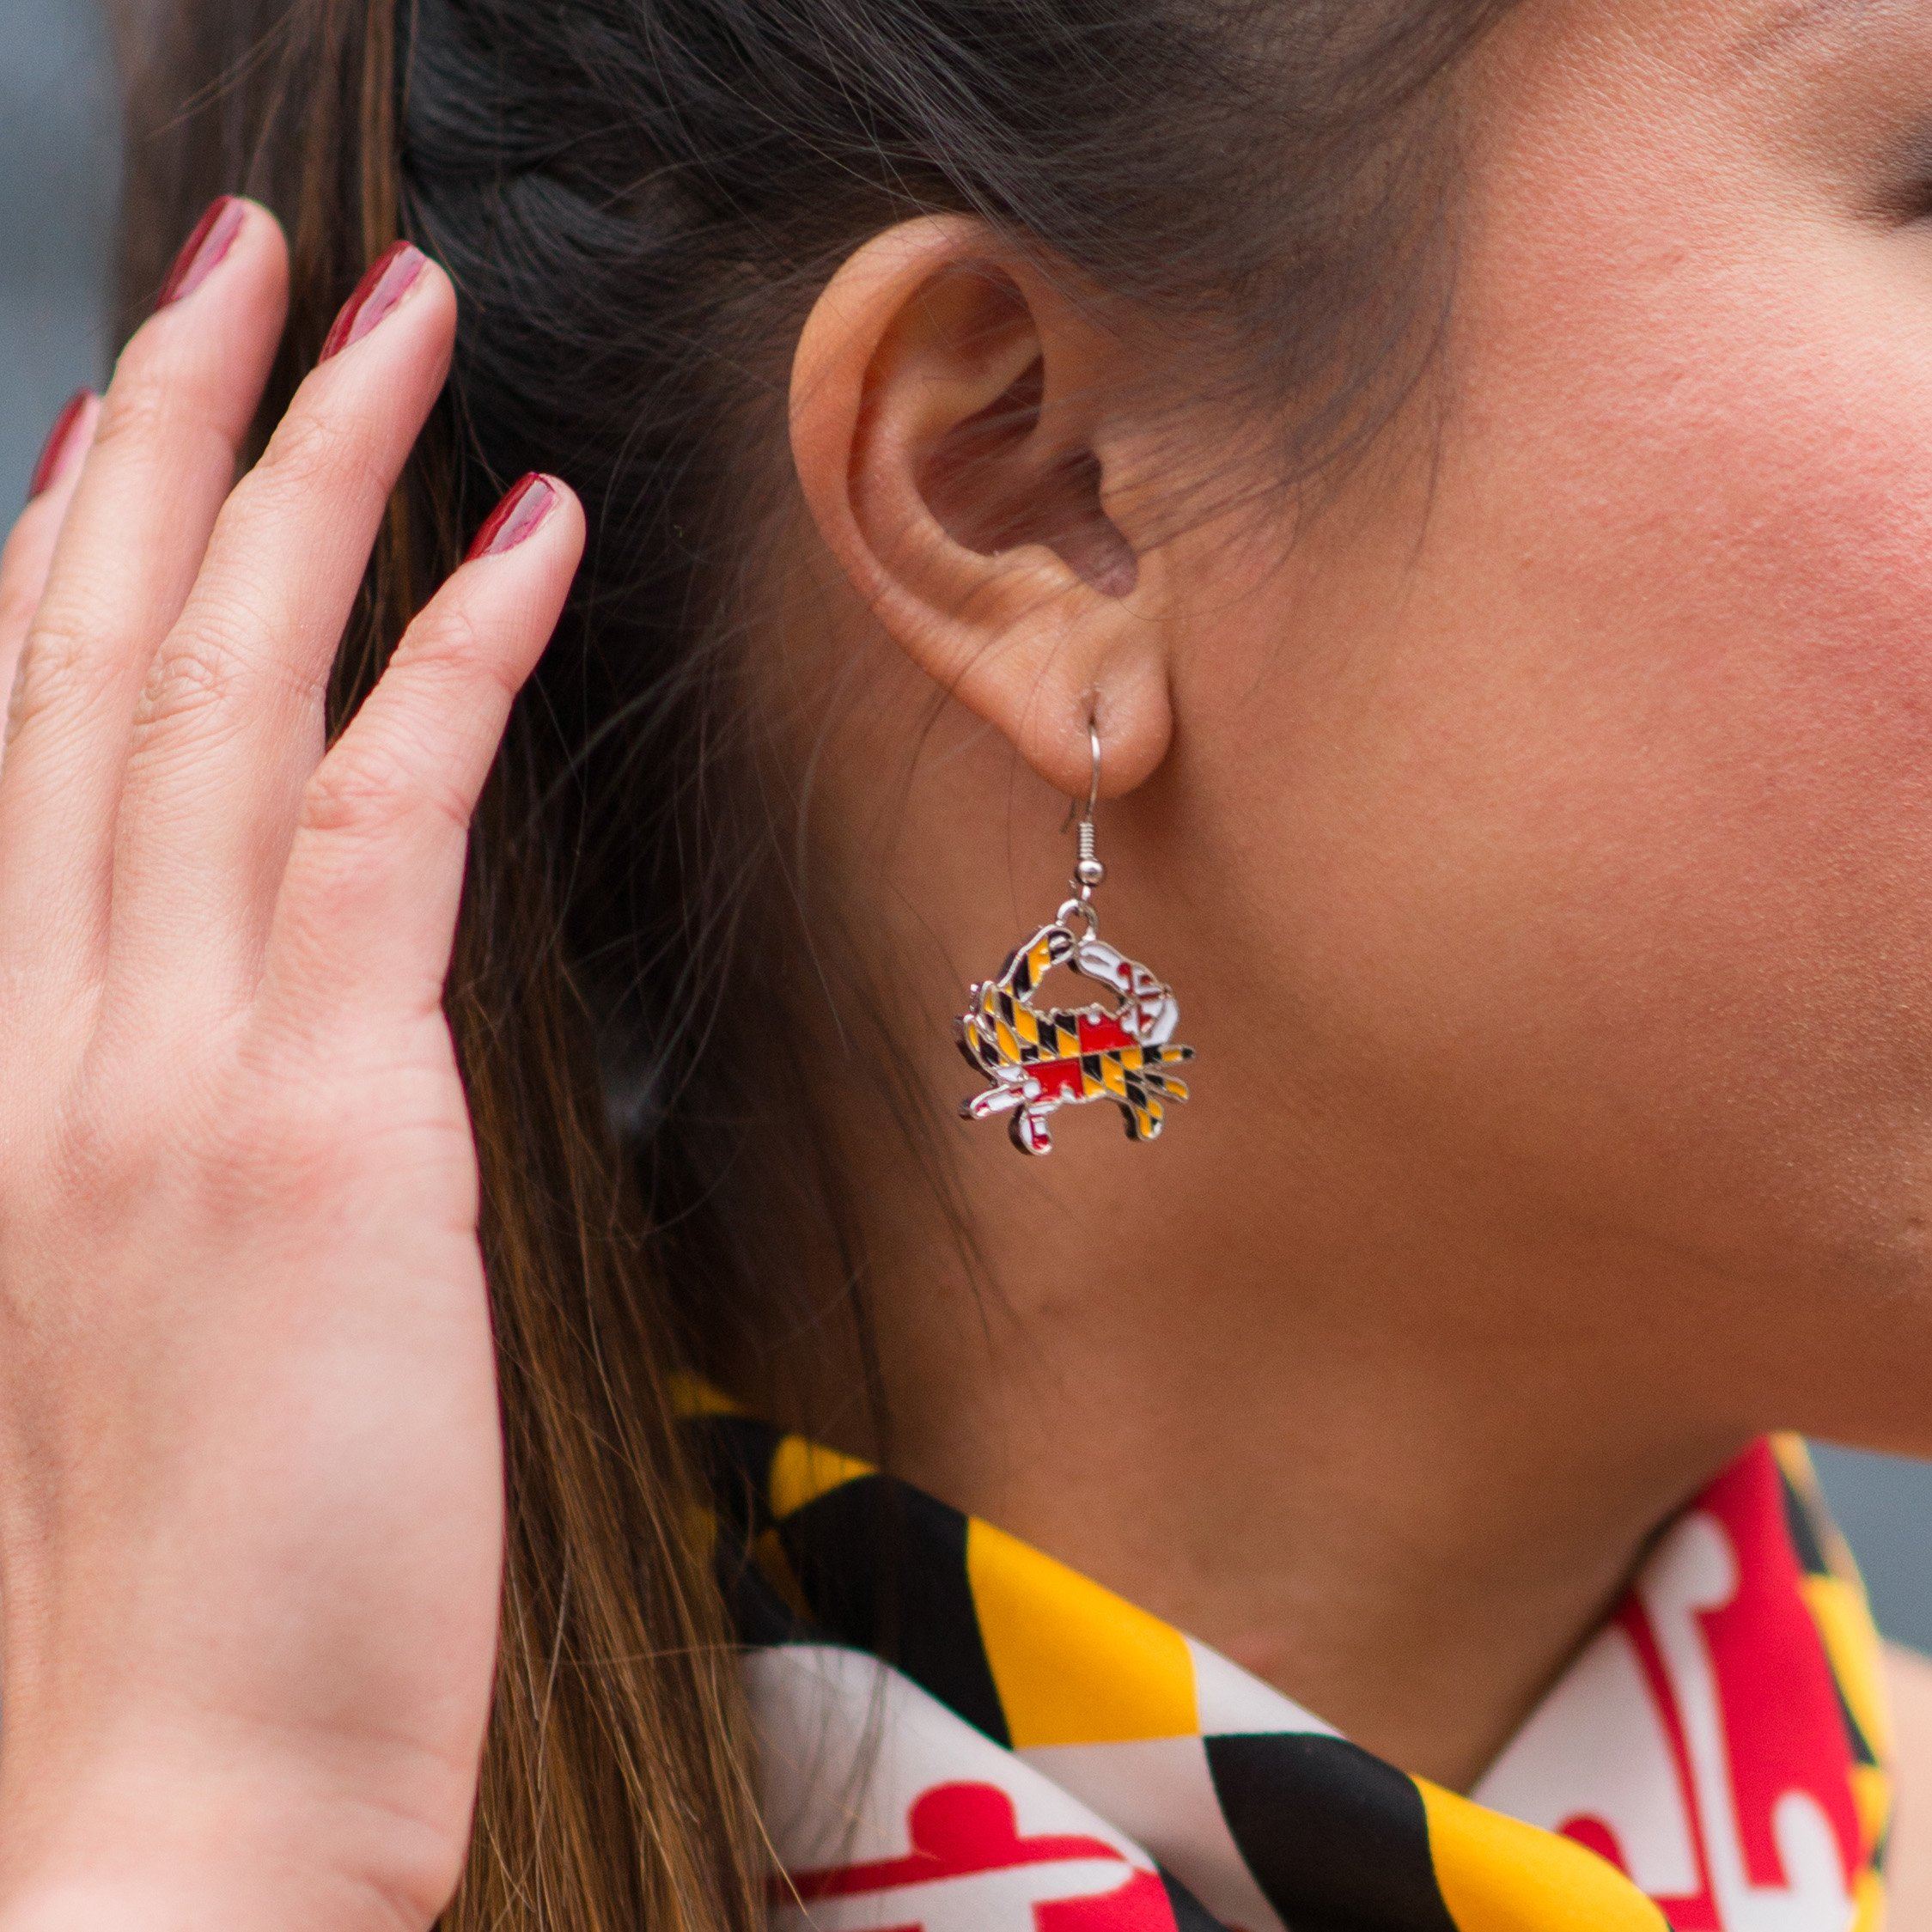 Maryland Full Flag Crab / Earrings - Route One Apparel